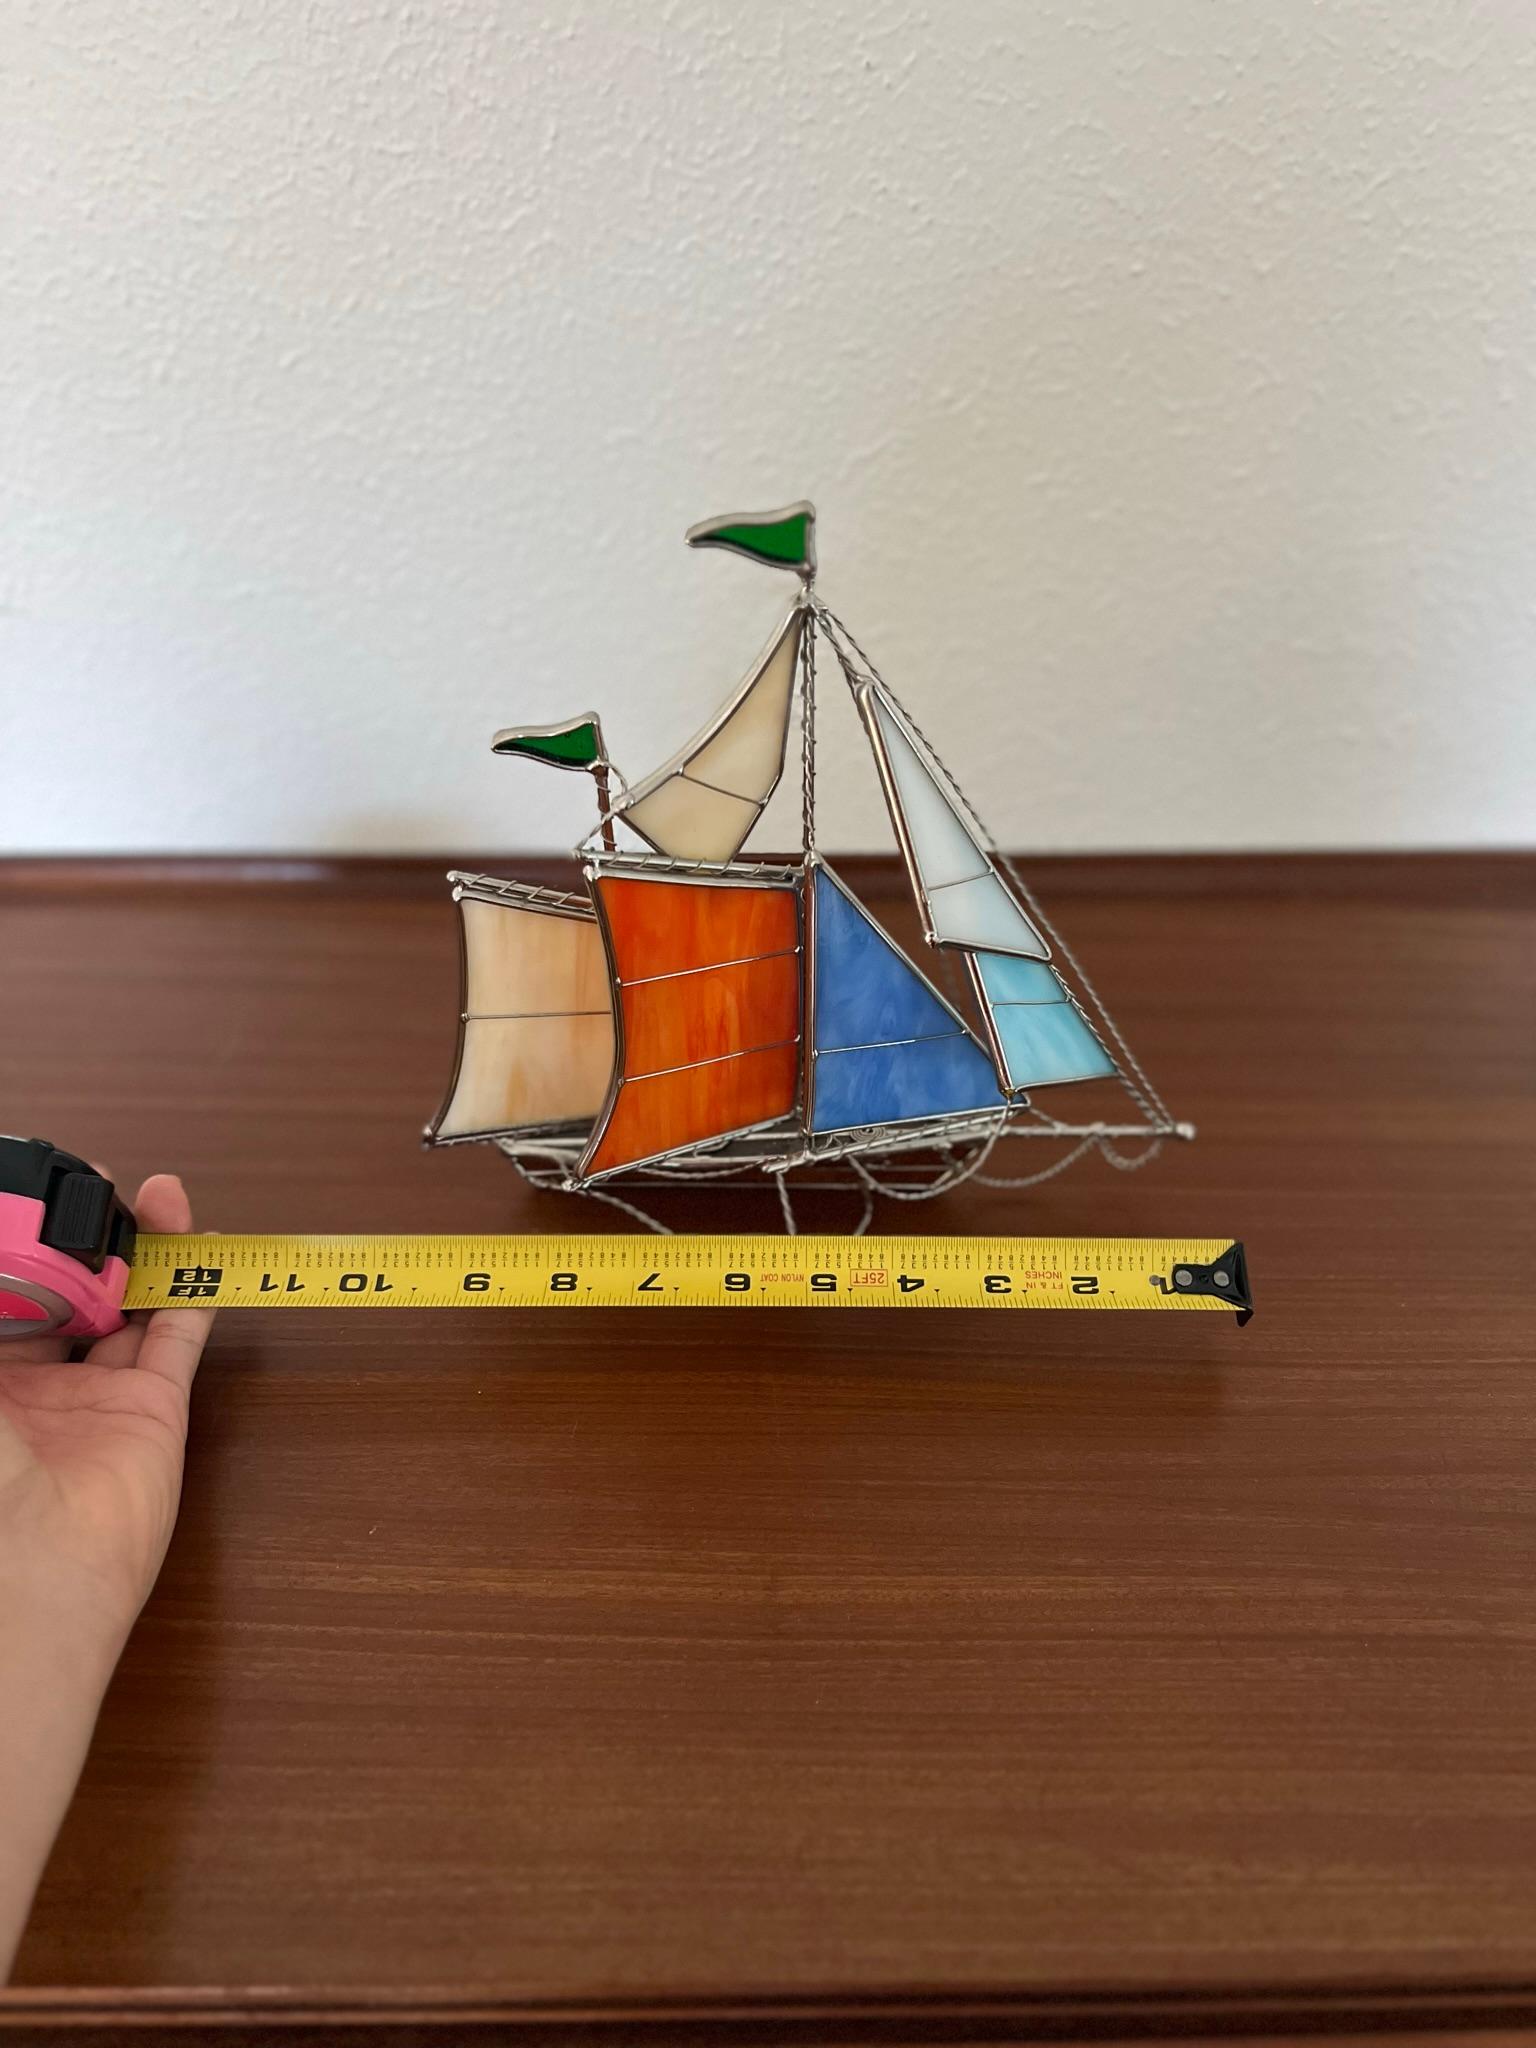 Beautiful handcrafted stained glass sailboat ship. This is a really nice sailboat constructed from stained glass and other metals. It displays well on a shelf or desk. Great for the nautical lover. In excellent condition.

Ship measures